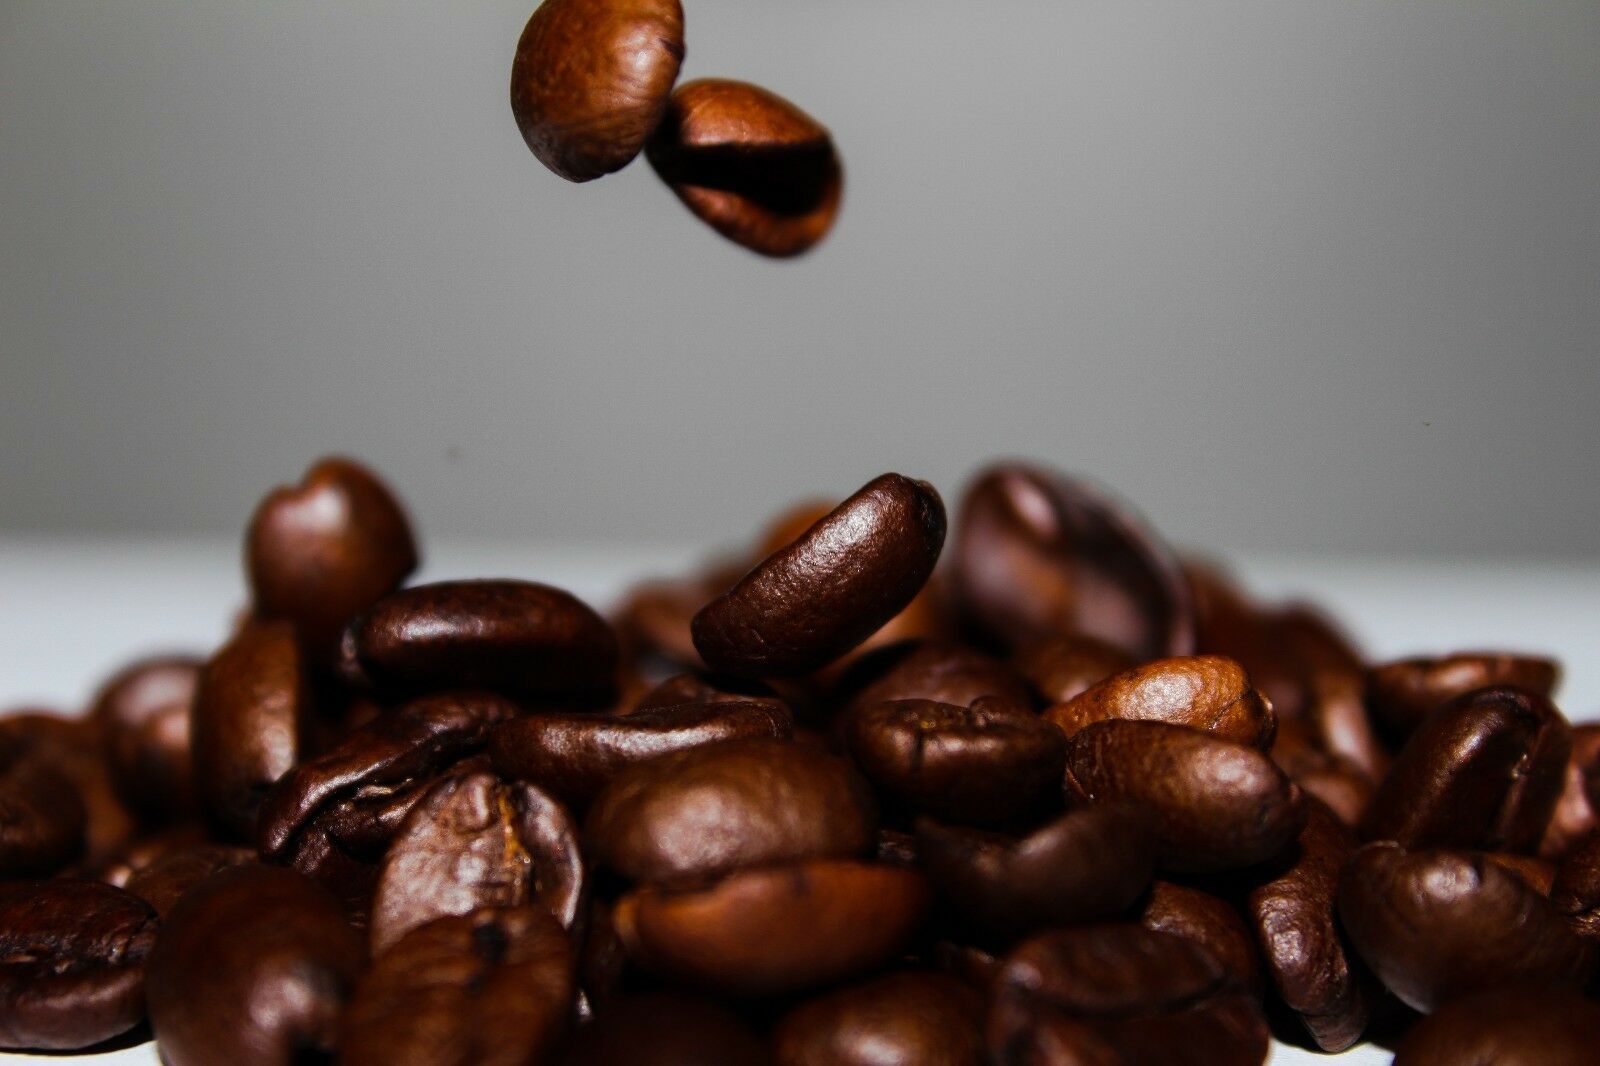 ROBERT'S CHOICE - 2 / 1 lb Bags of Fresh Roasted Coffee (Bean or Ground) - $24.50